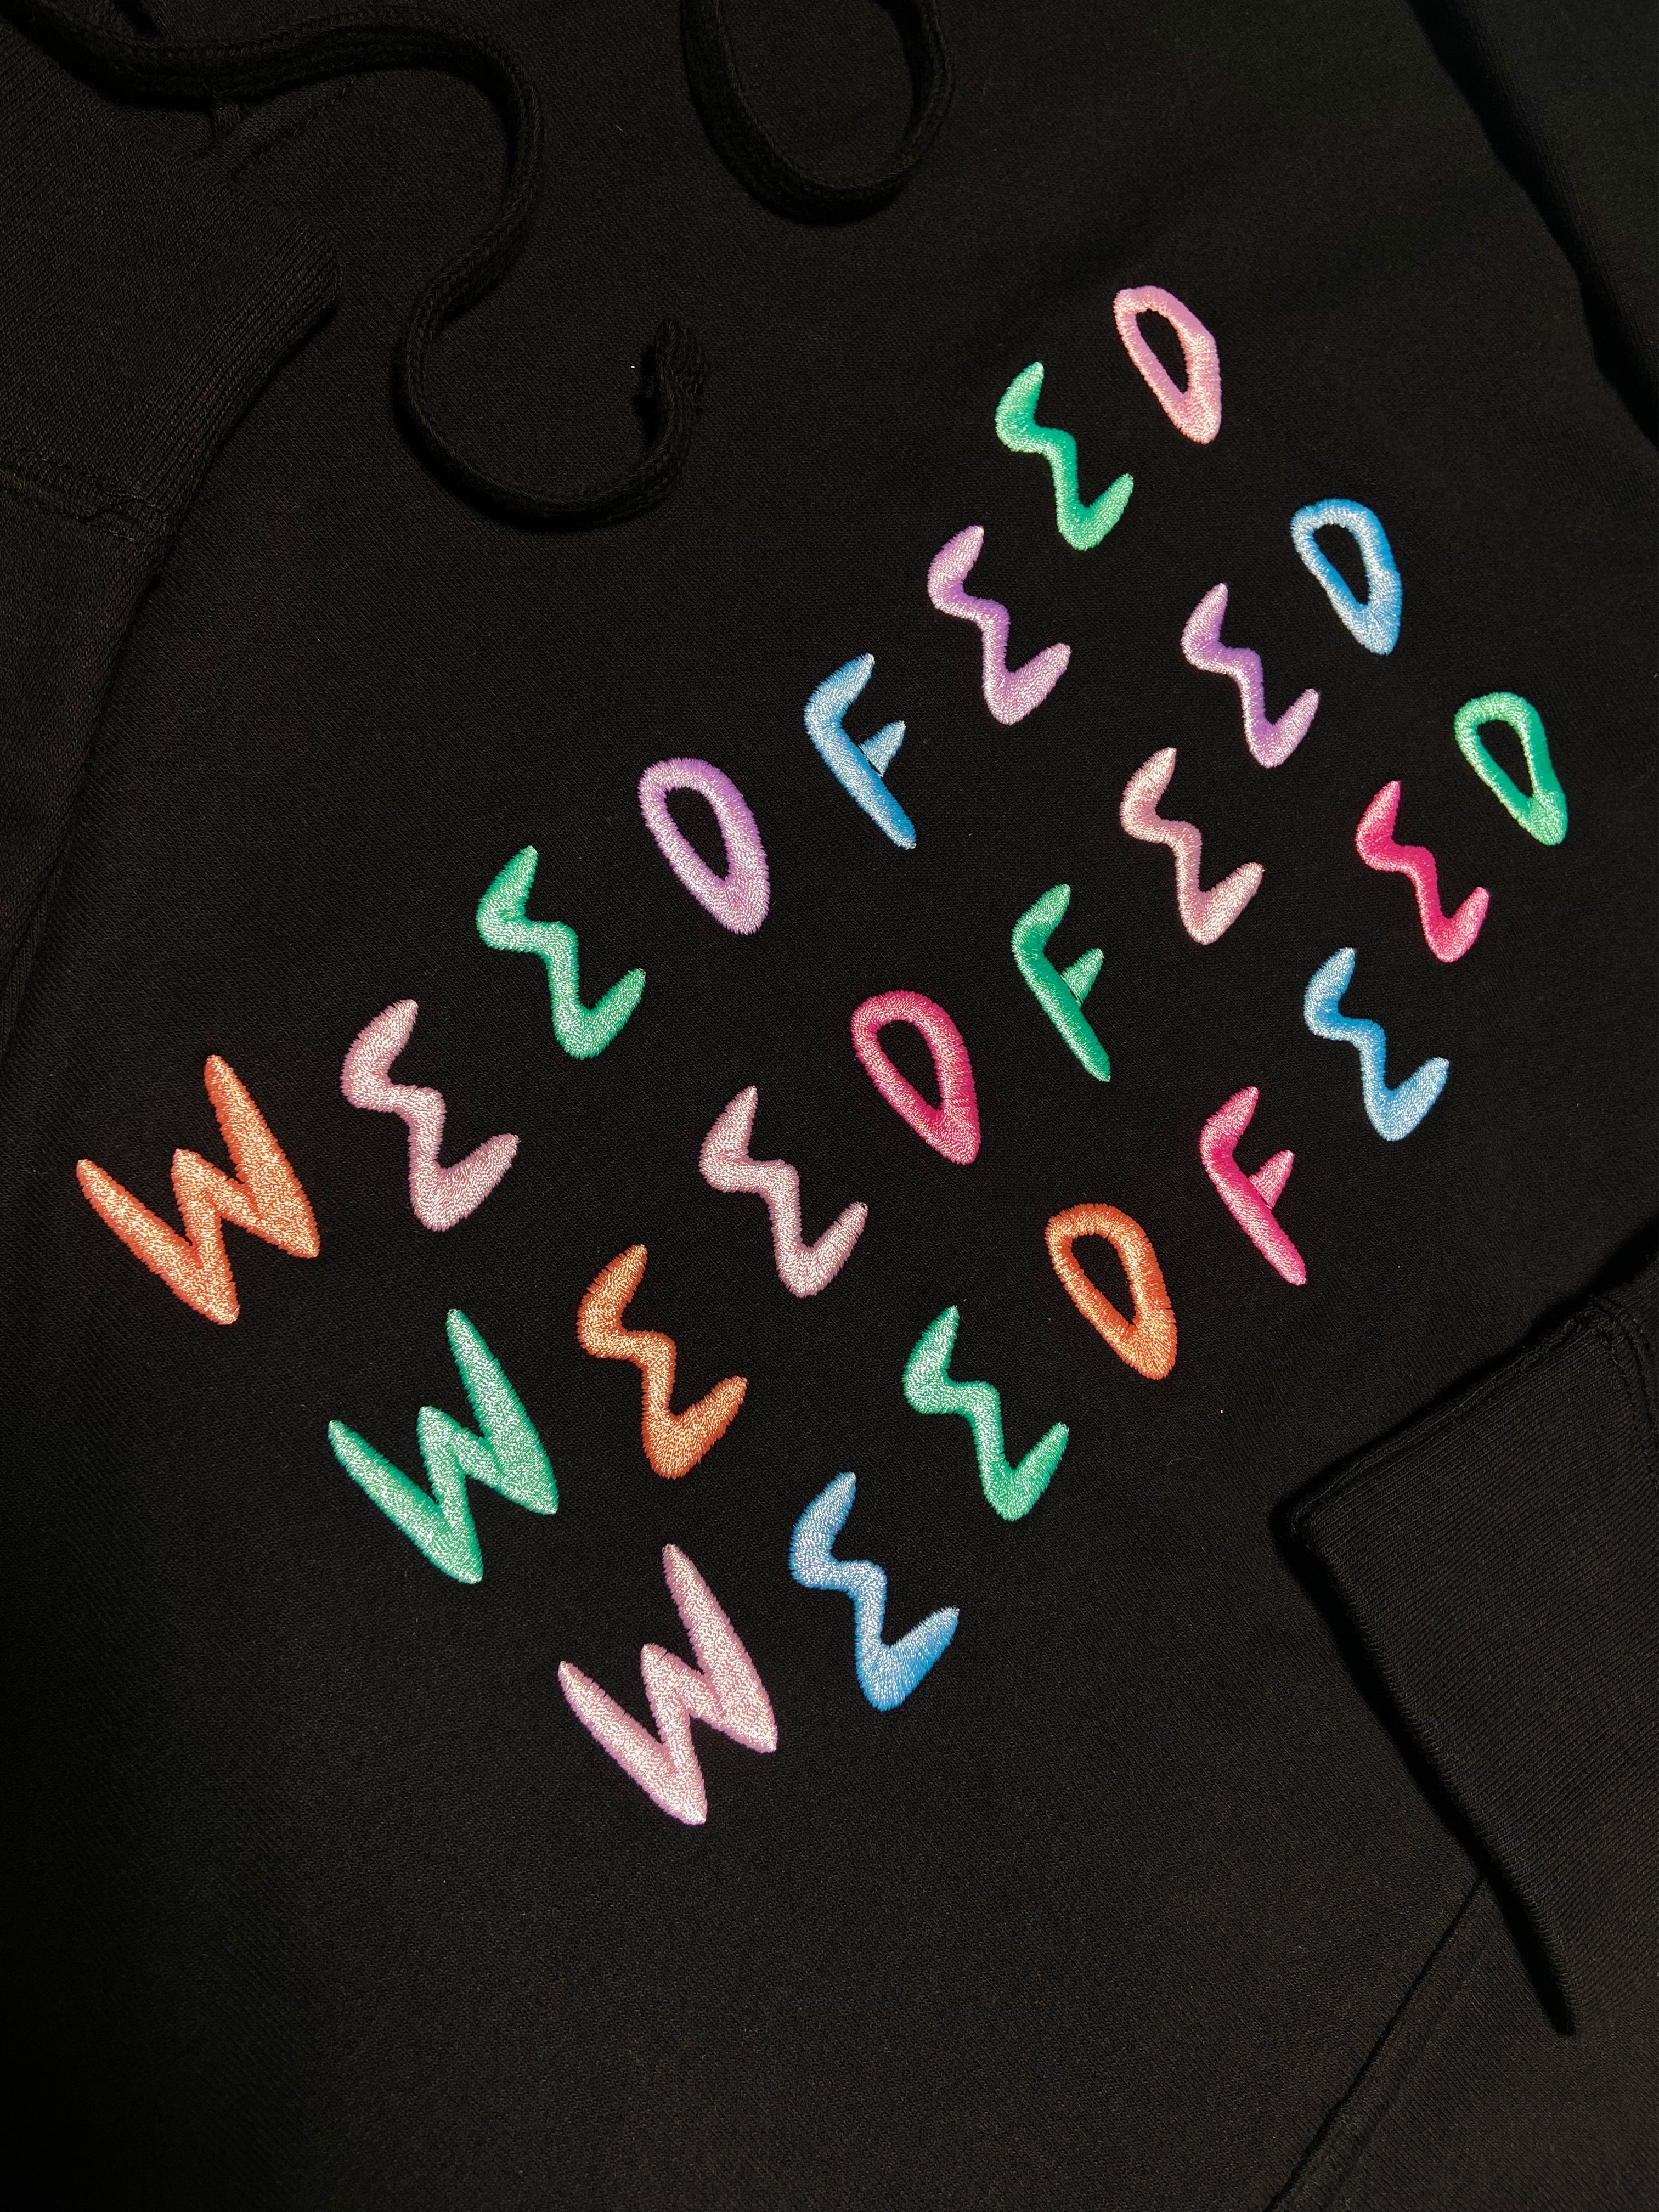 WeedFeed Embroidered Cotton Hoodie